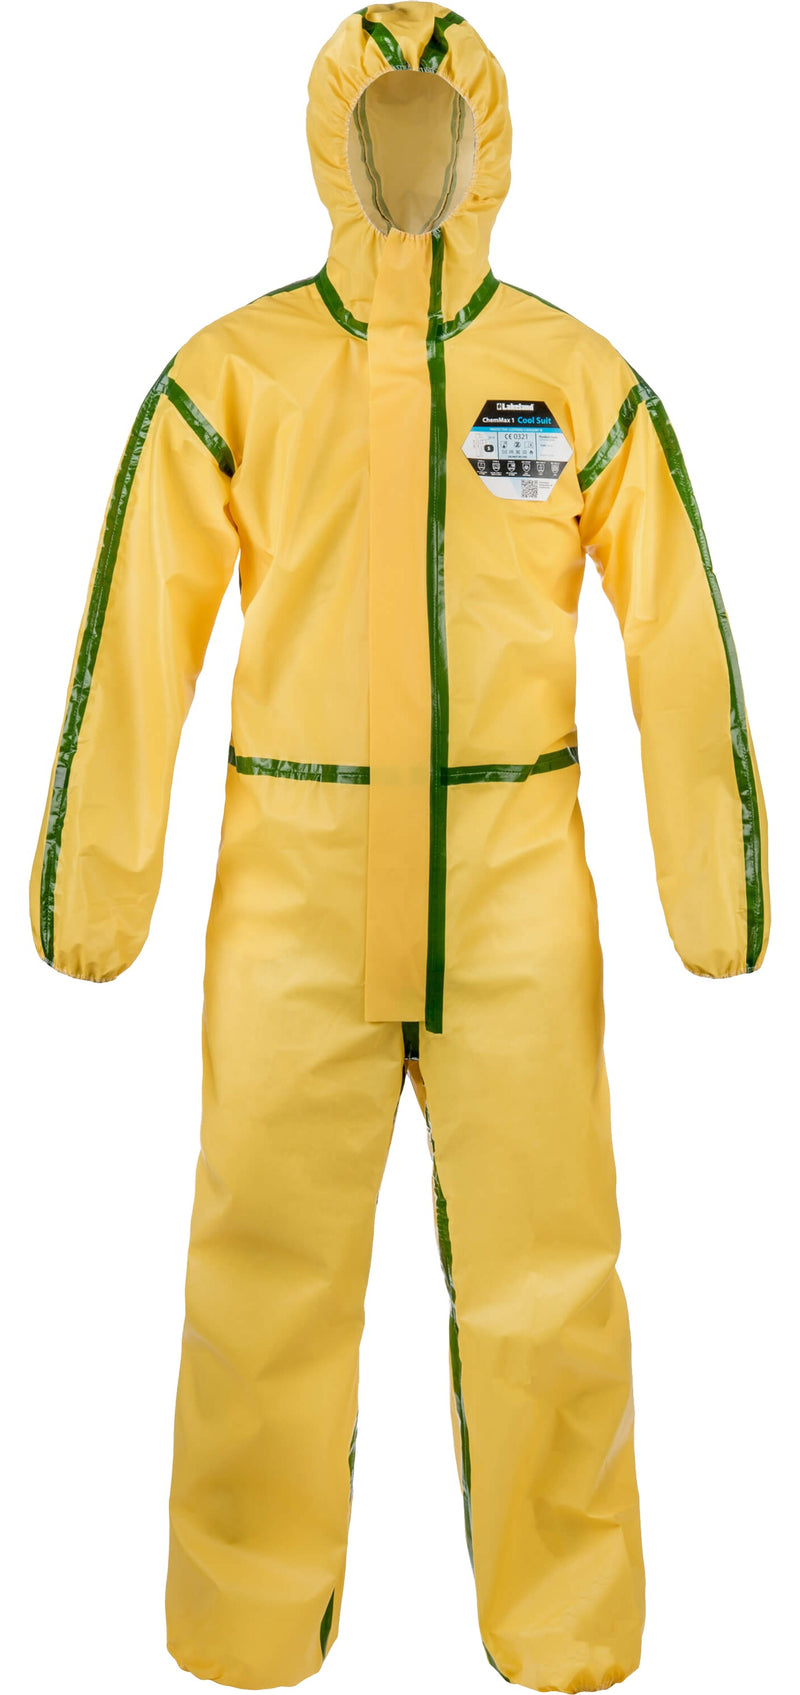 ChemMax® 1 - Cool Suit® chemical protection Coverall